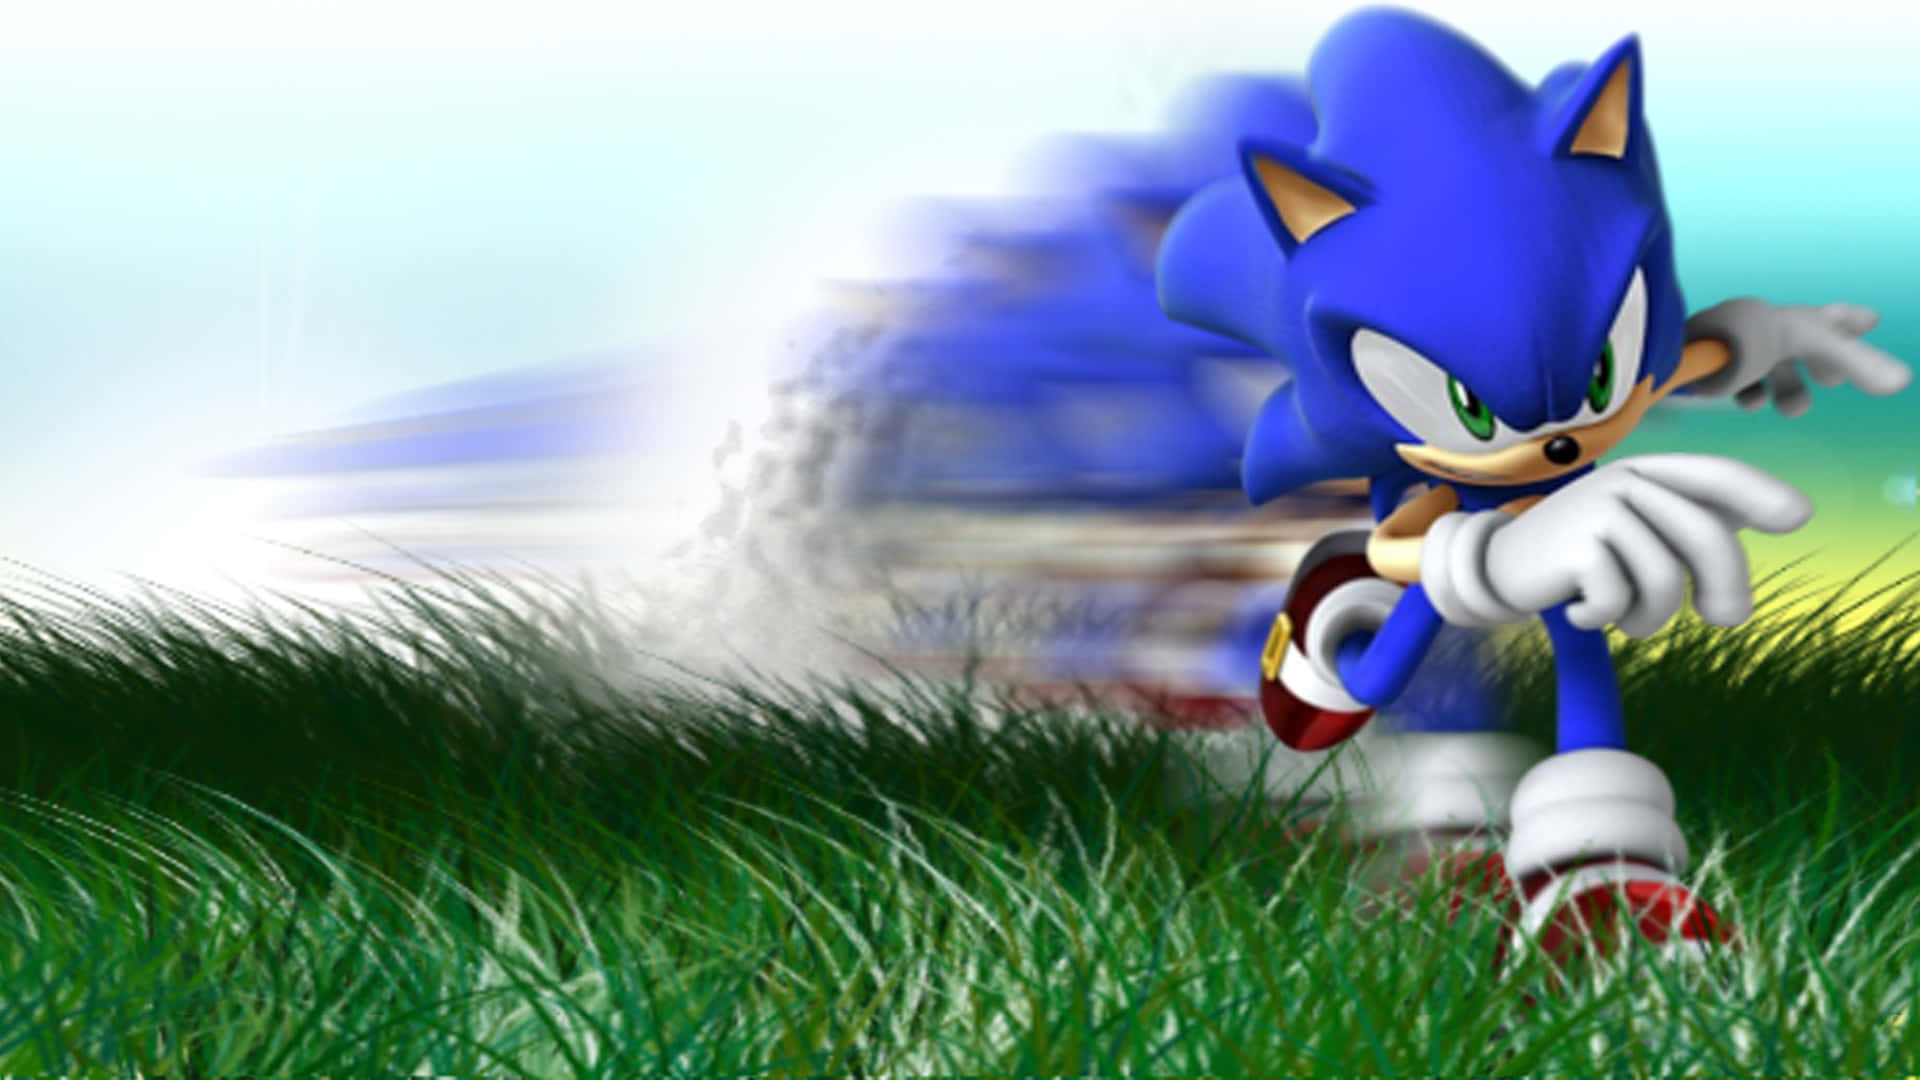 The fastest hedgehog alive: Sonic!